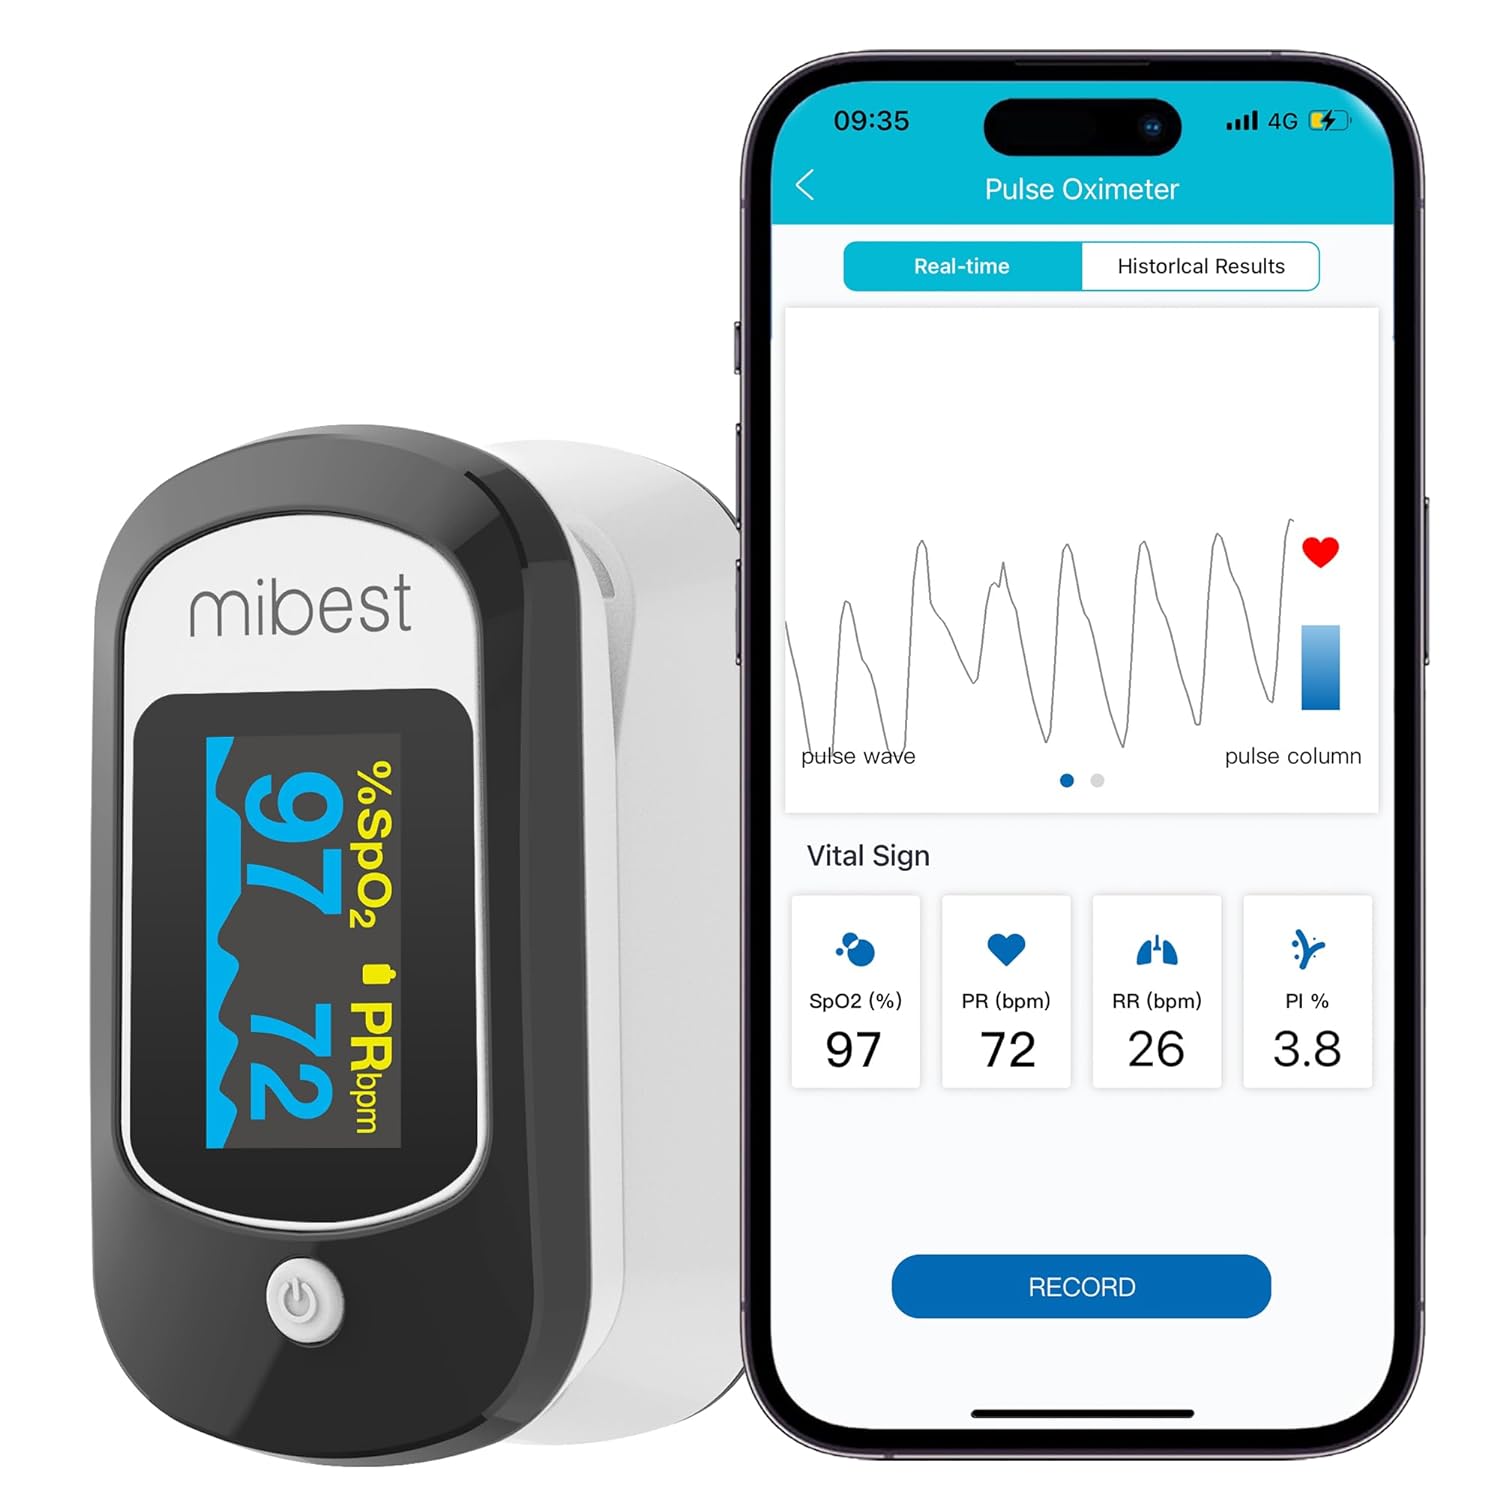 Mibest Bluetooth Pulse Oximeter - Blood Oxygen Saturation Monitor with App - SpO2, Pulse Rate, Respiration Rate, Plethysmograph and PI - Compatible with iOS & Android Smartphones - Free App